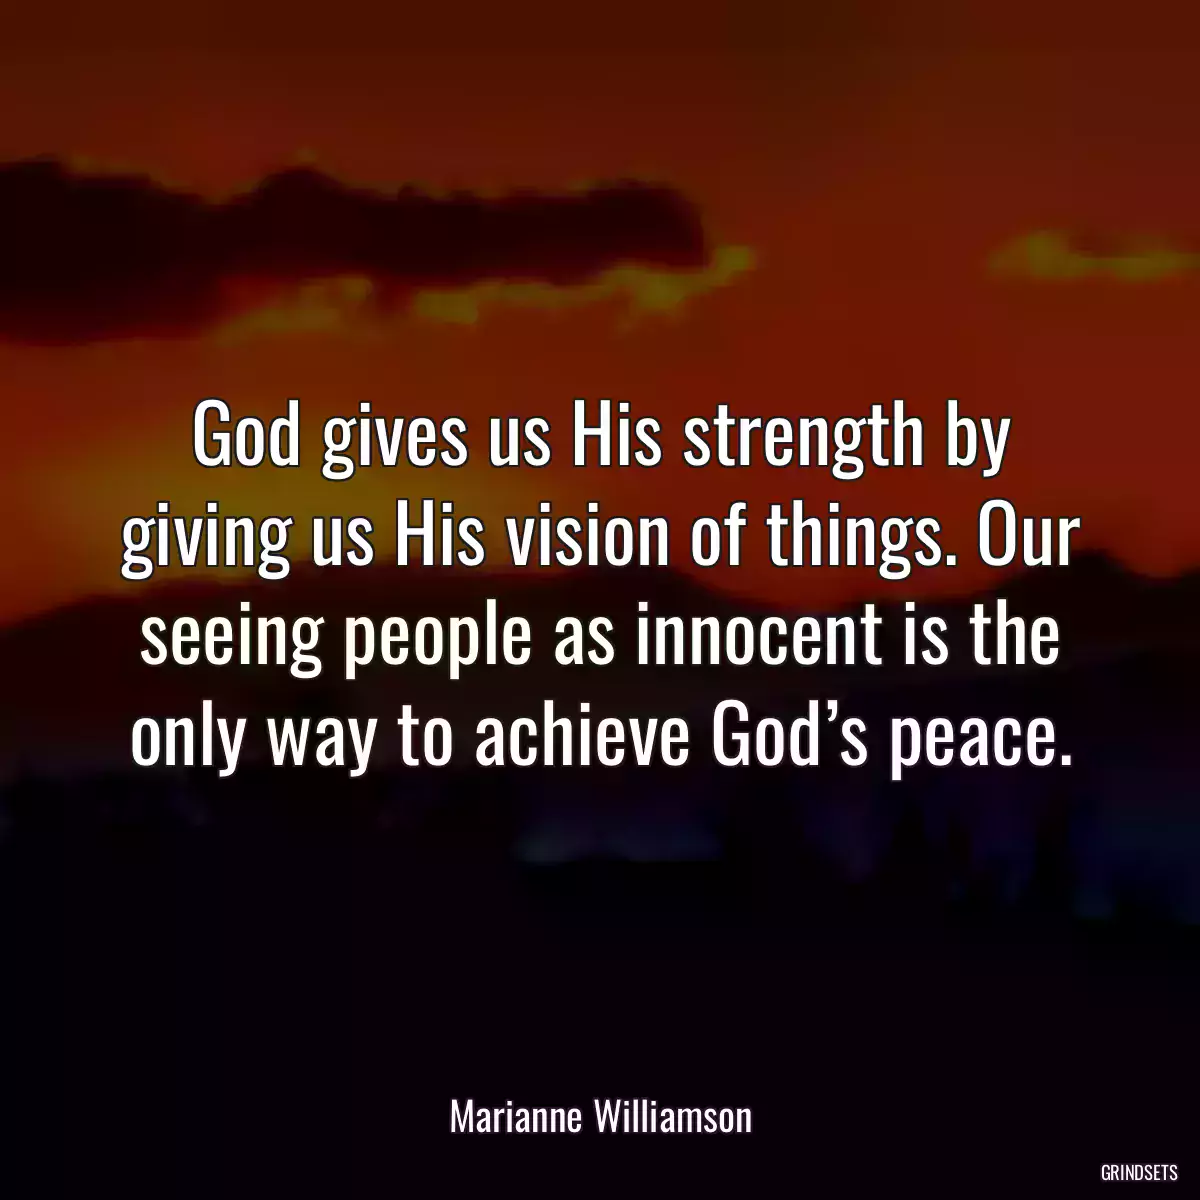 God gives us His strength by giving us His vision of things. Our seeing people as innocent is the only way to achieve God’s peace.